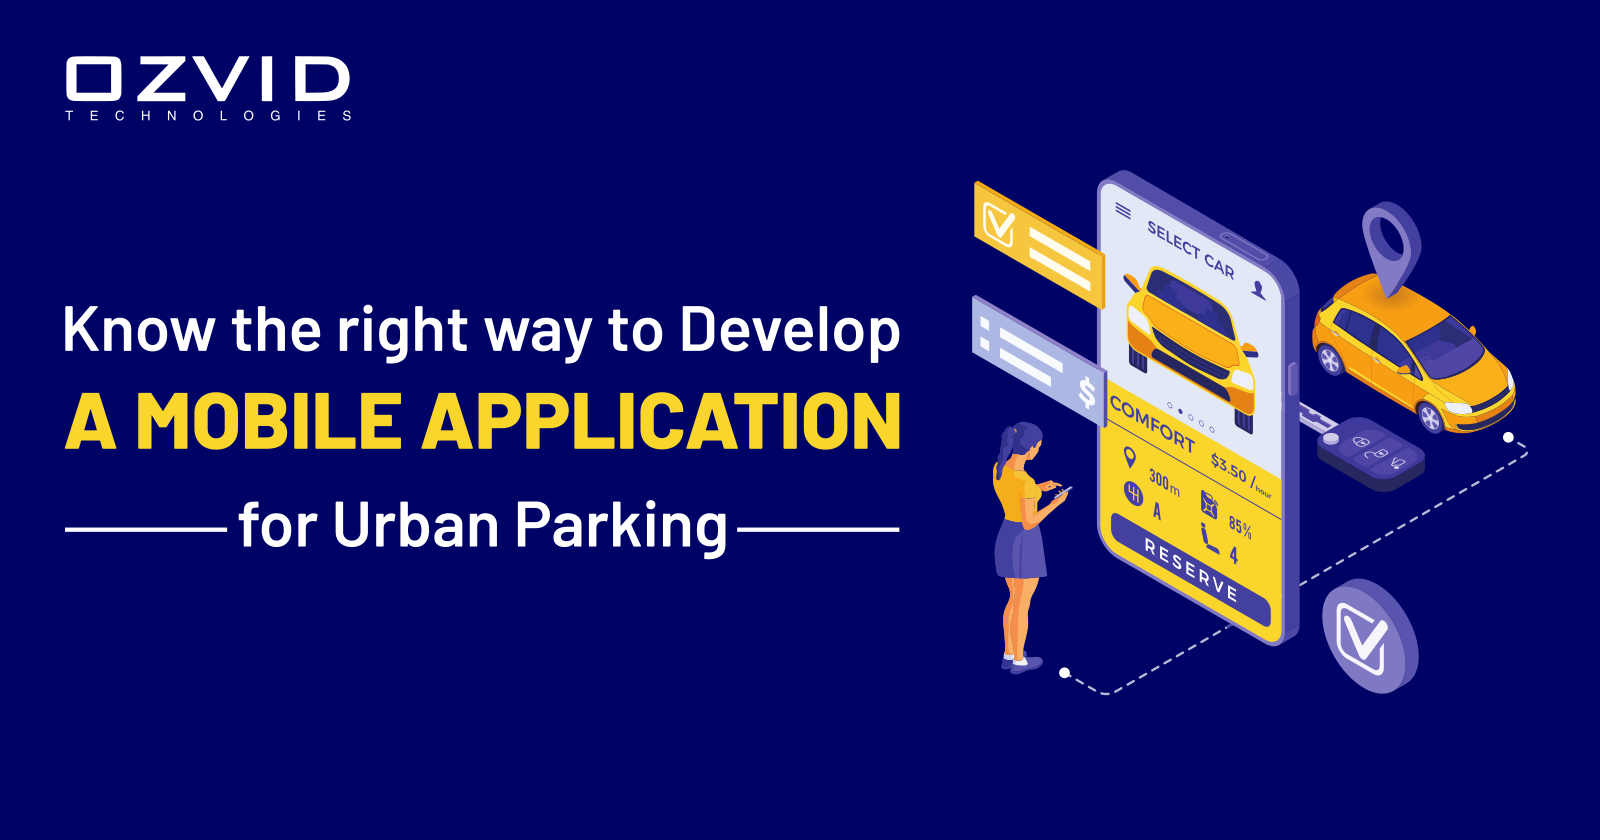 Know the Right Way to Develop a Mobile Application for Urban Parking